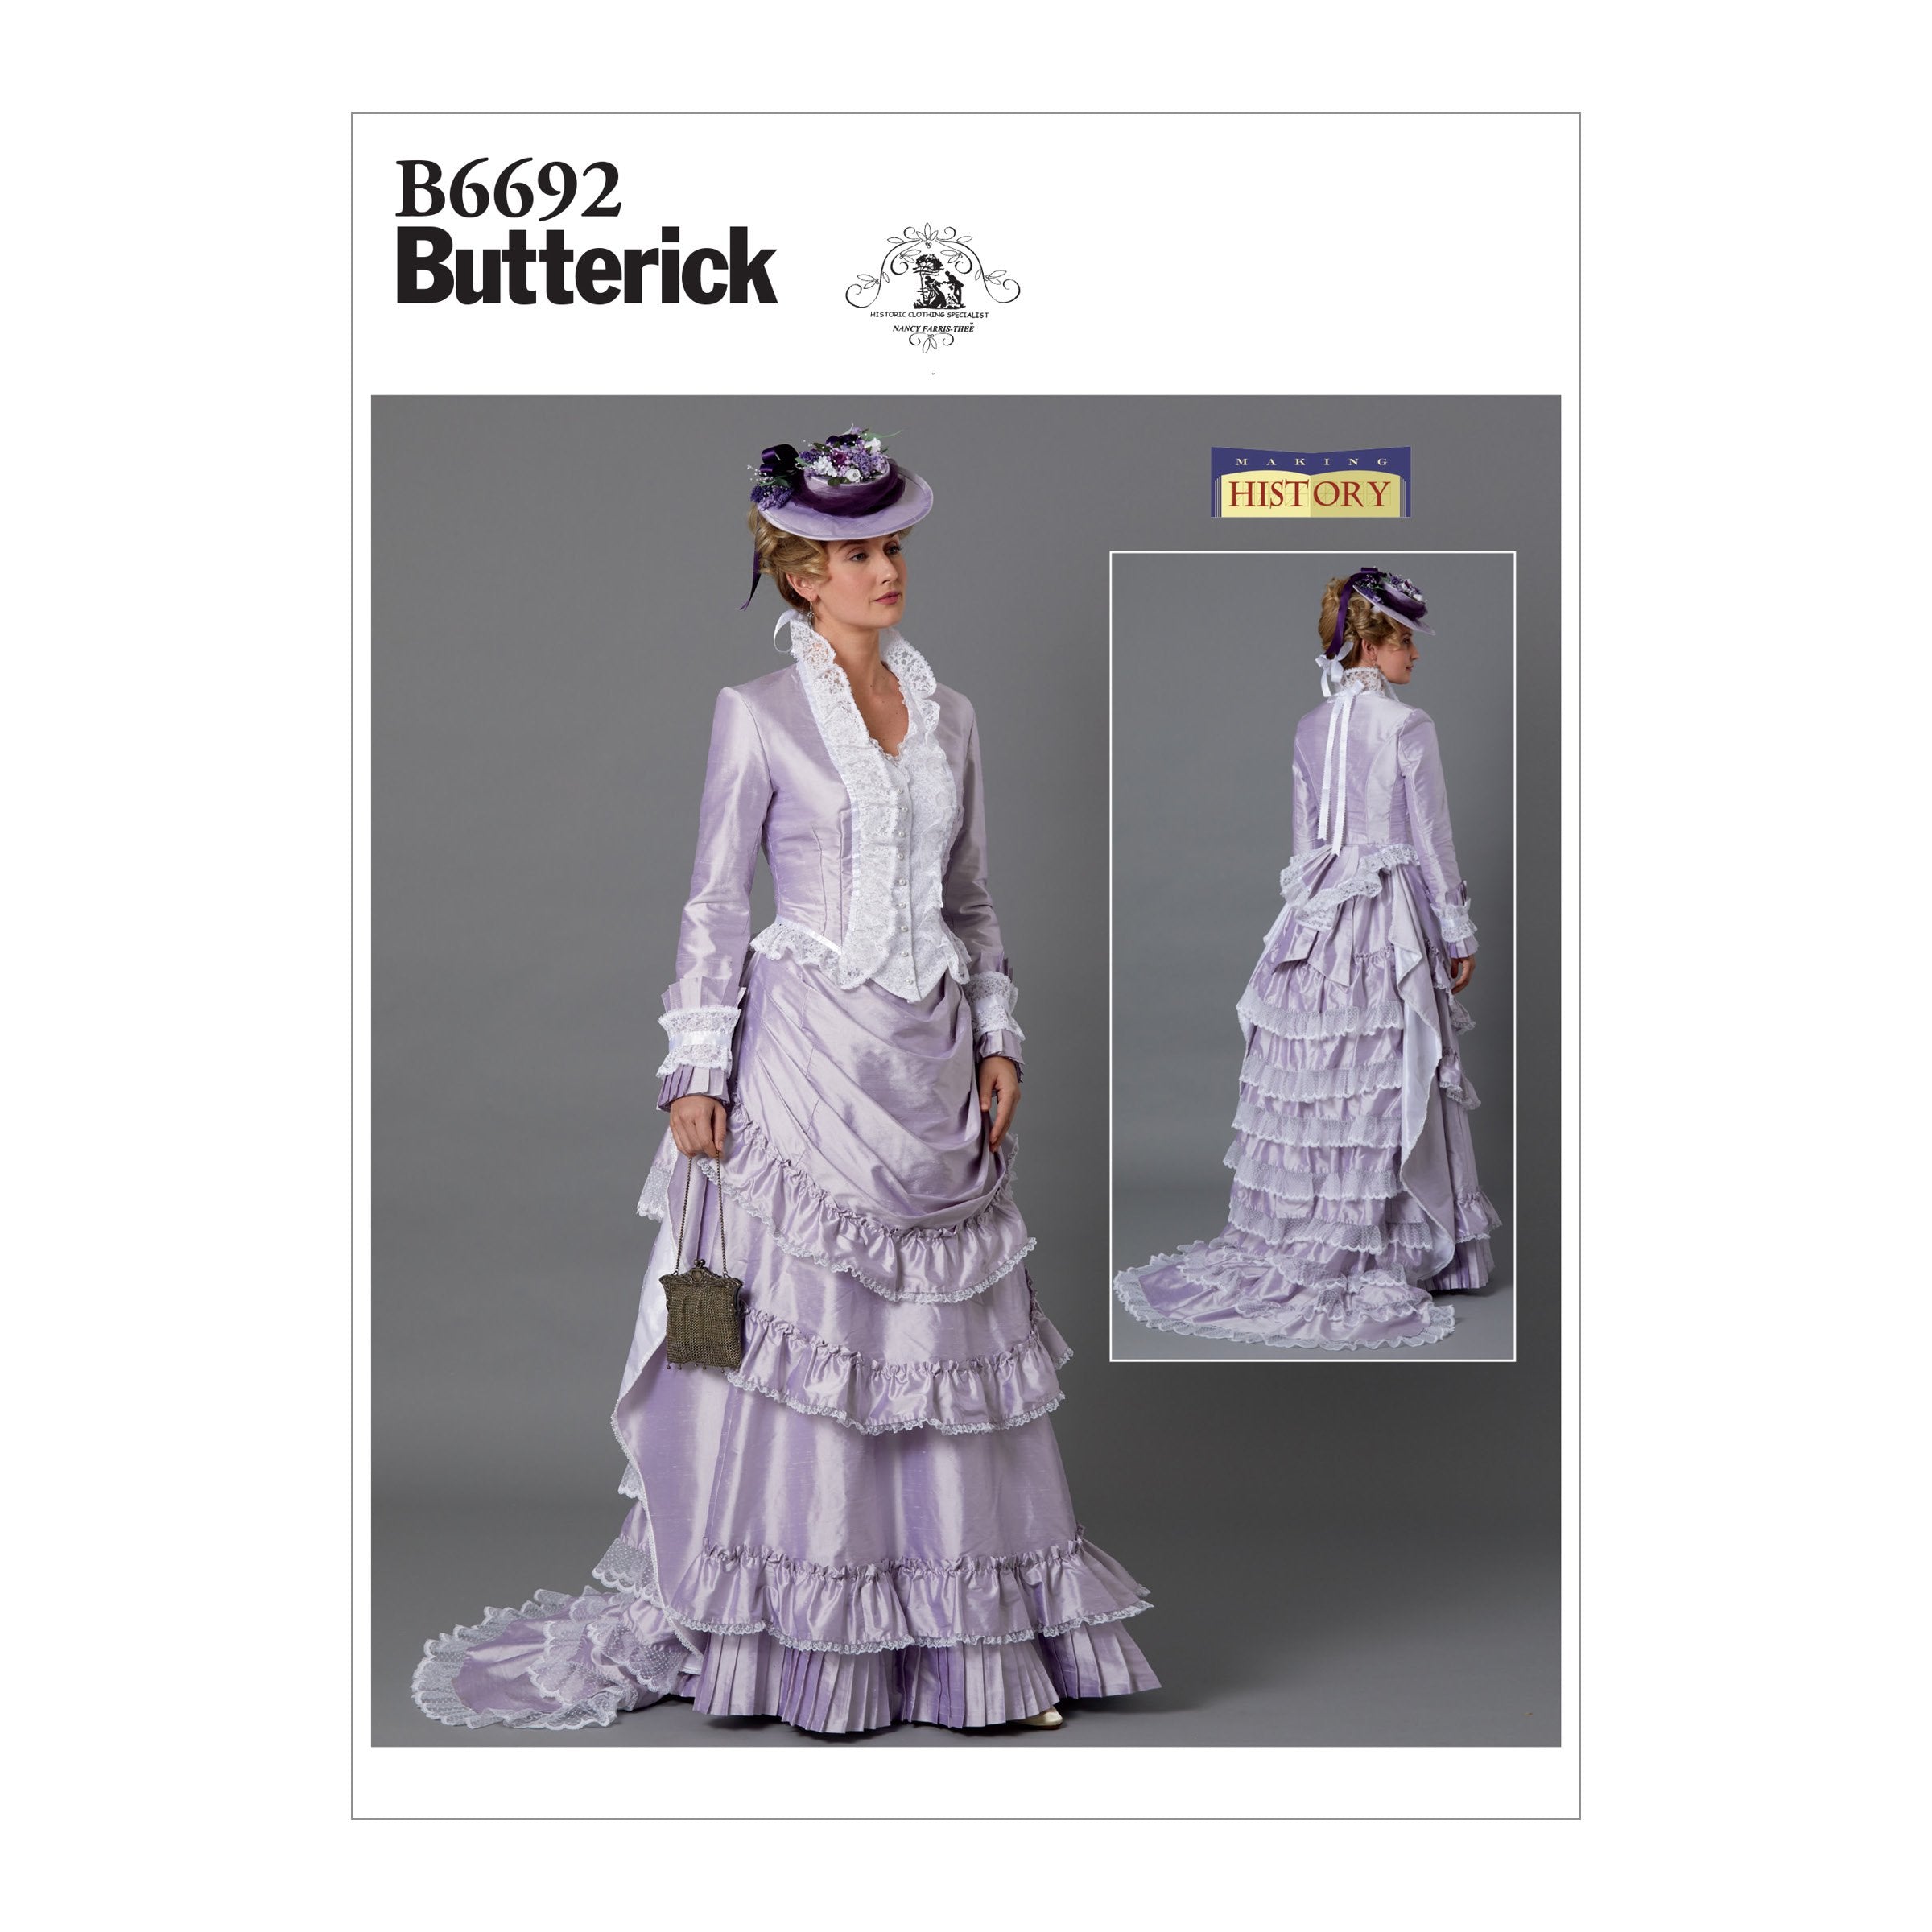 Butterick B6692 Misses' Costume Pattern from Jaycotts Sewing Supplies